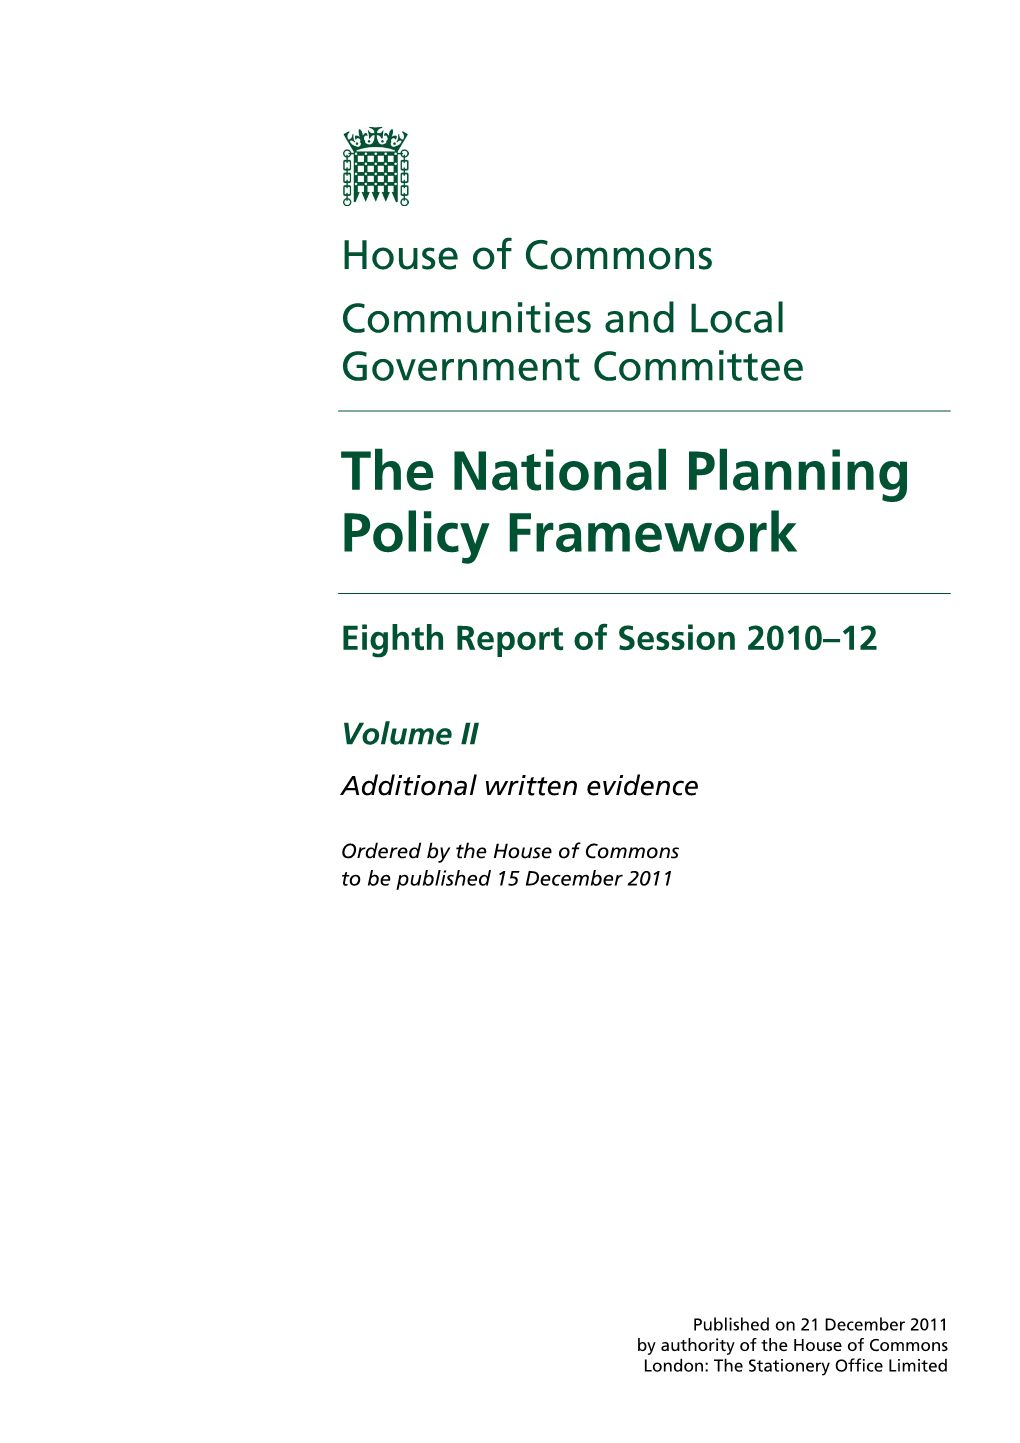 The National Planning Policy Framework